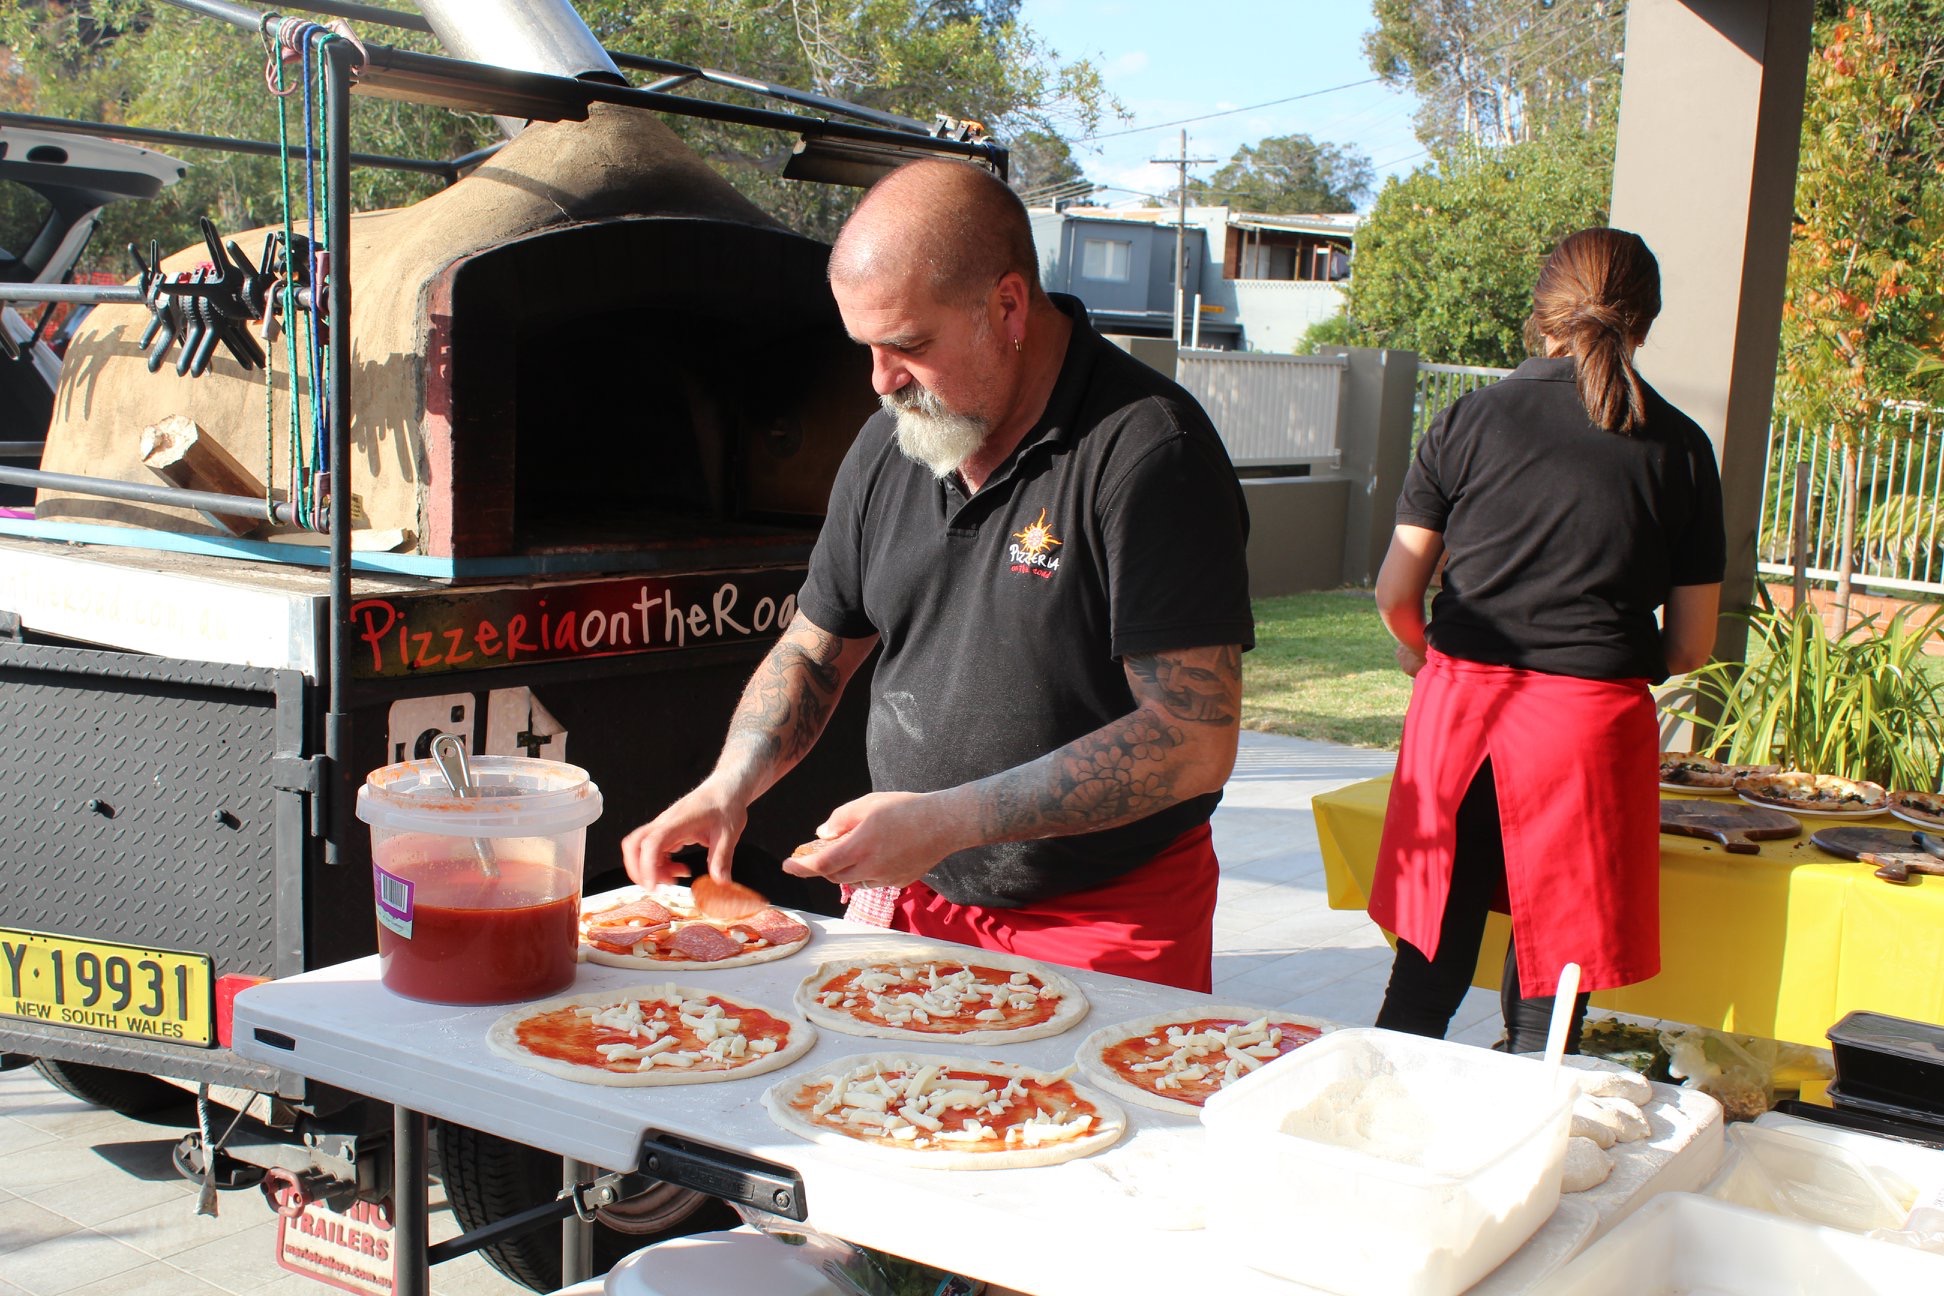 Mobile Pizza Catering Sydney - Pizzeria On The Road